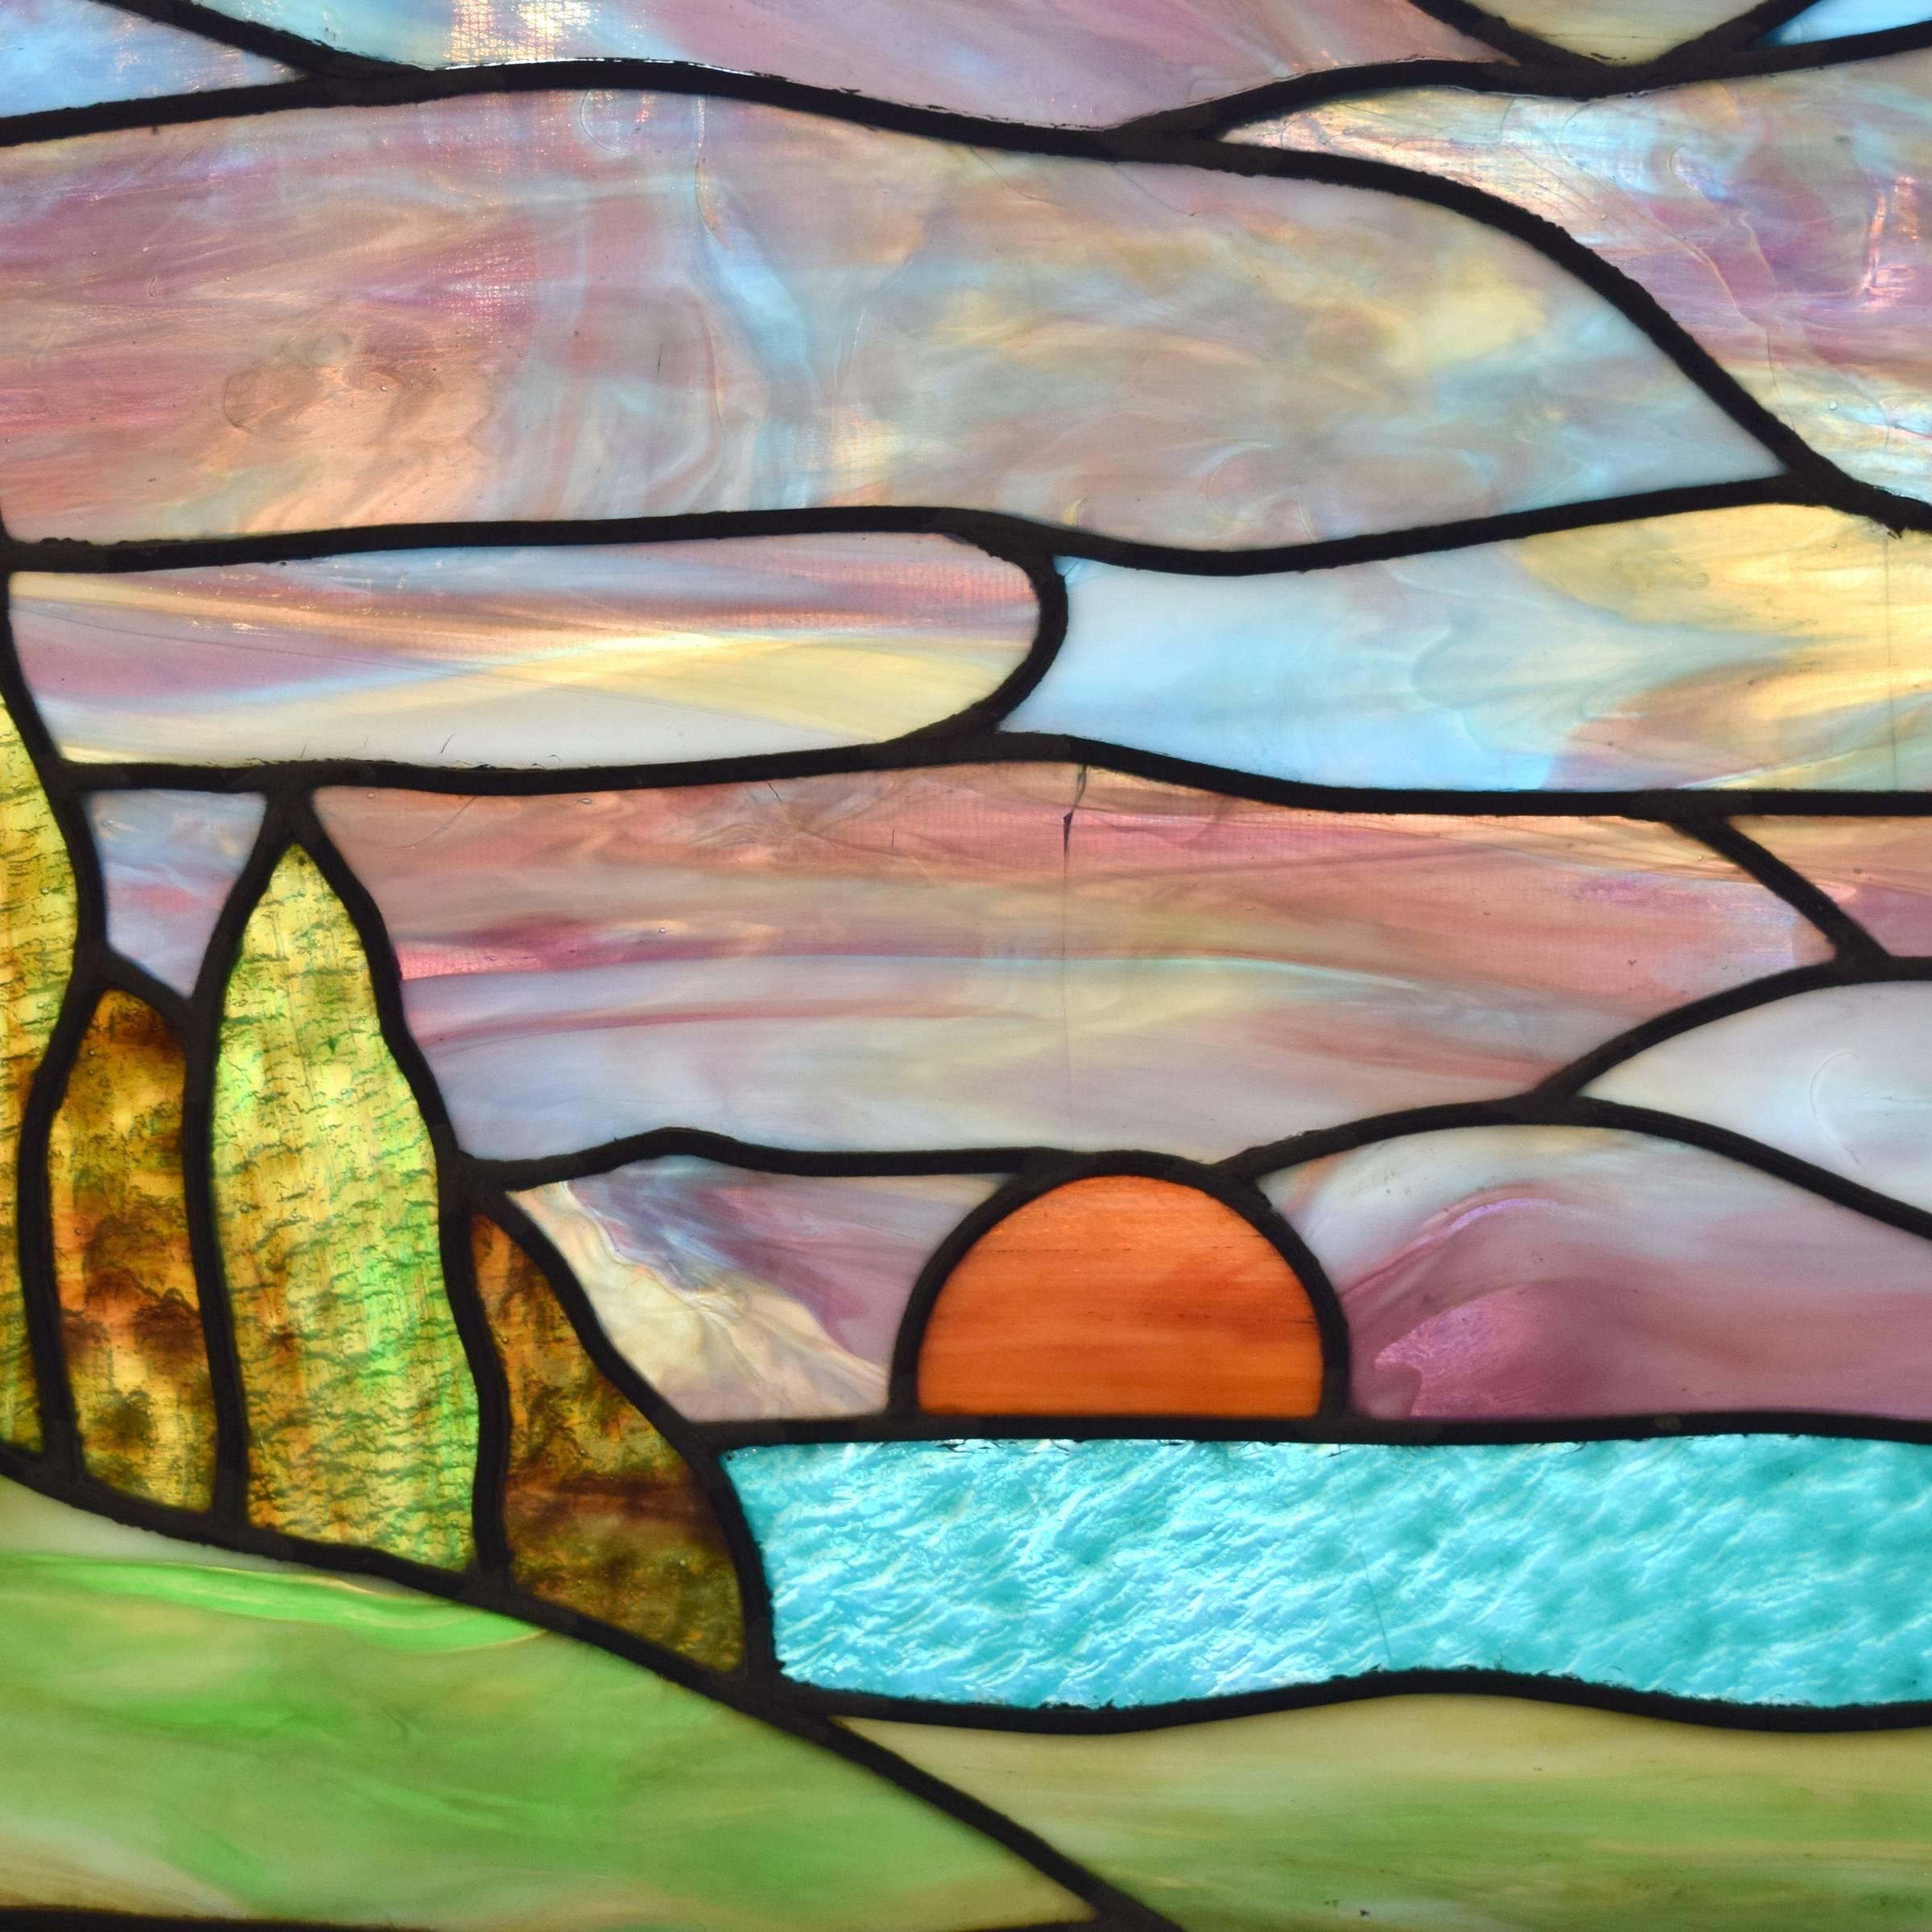 An American stained glass window depicting a sunset over a landscape.